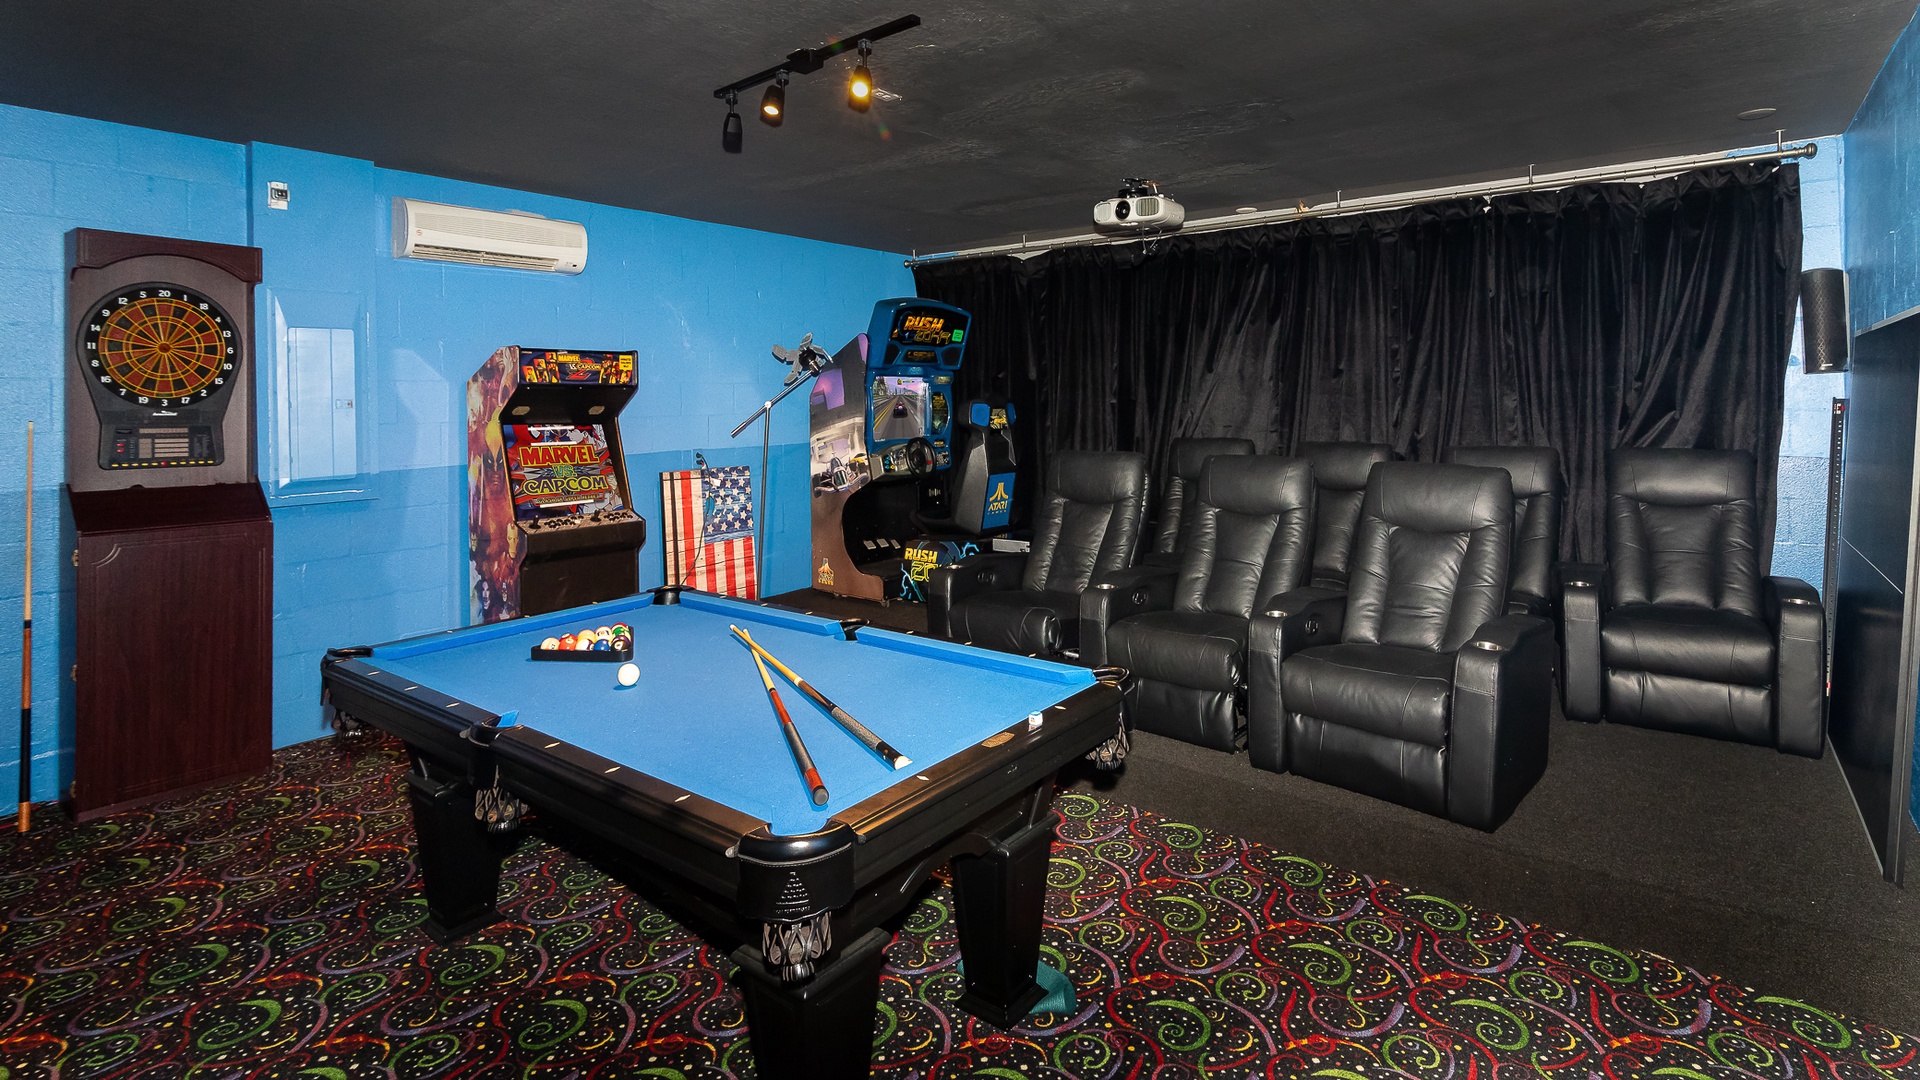 Theater/Game room with pool table and 2 arcade style games